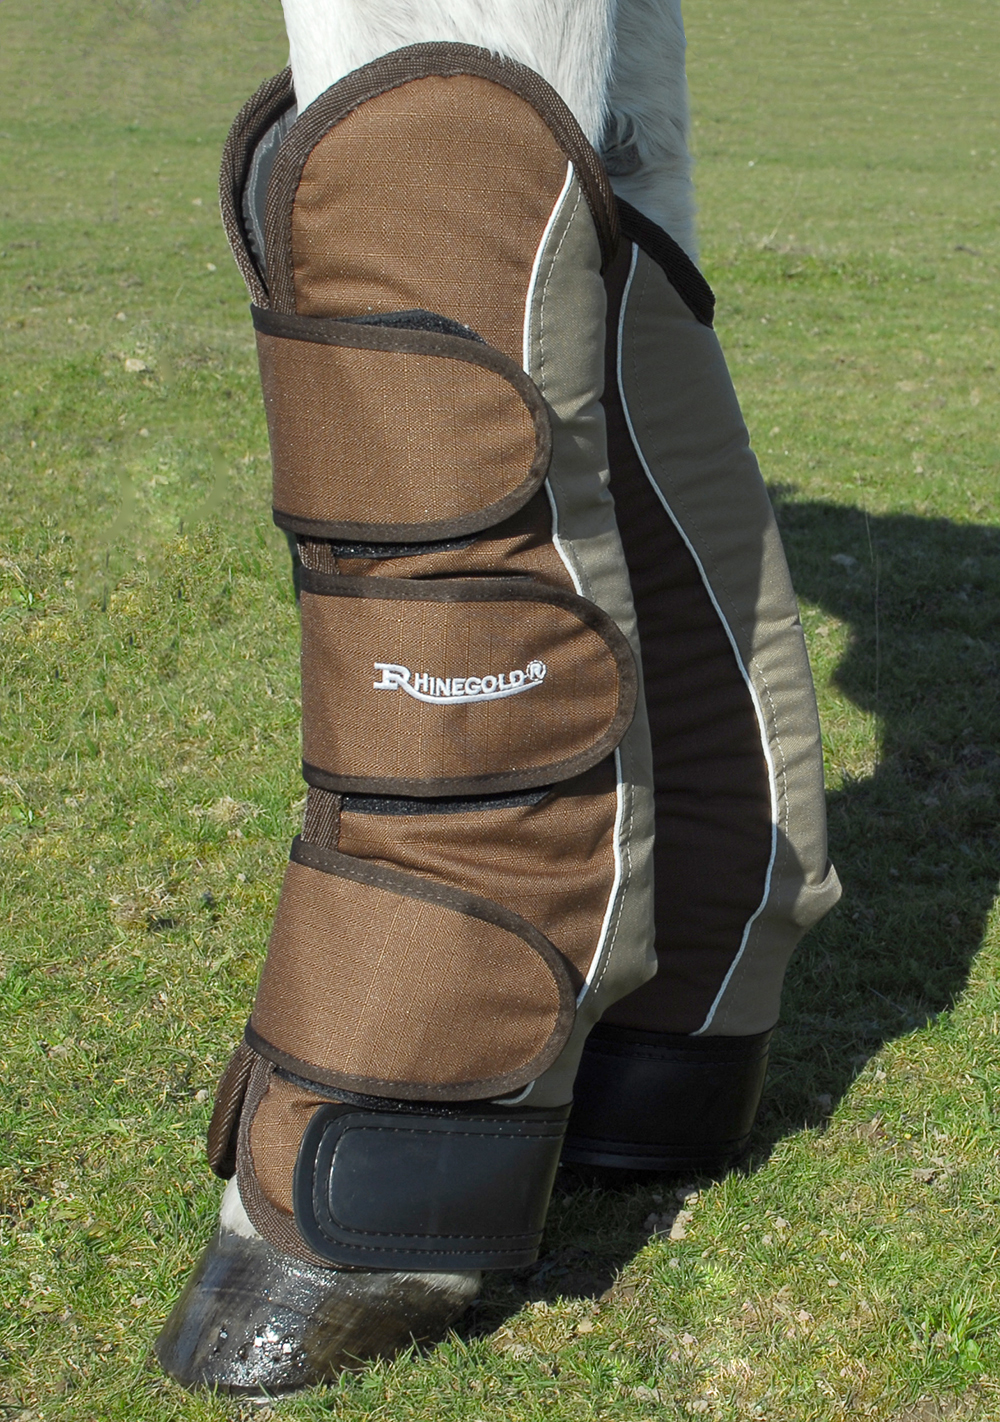 Rhinegold Full Length Travel Boots.Set of four